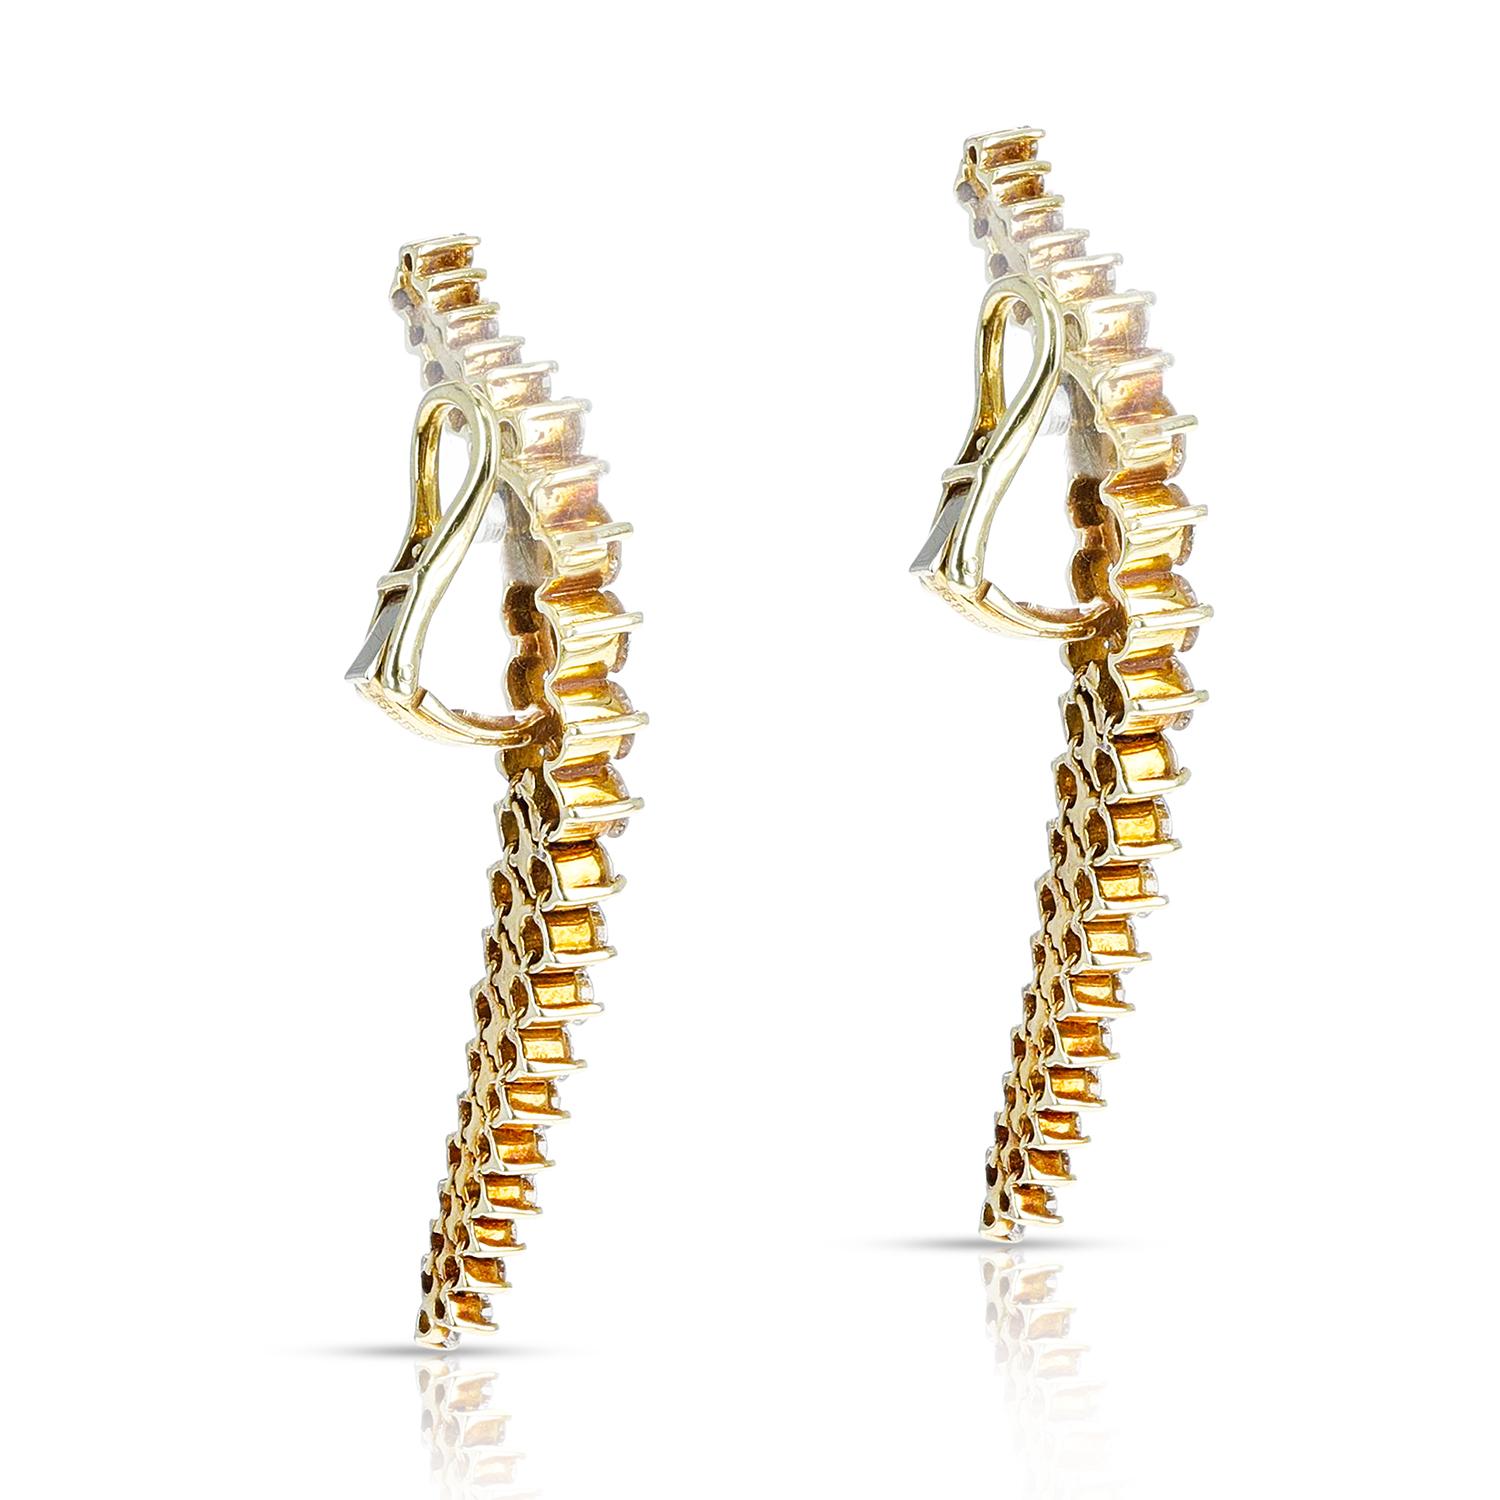 A pair of Curvy Cocktail Dangling Earrings with Round Diamonds by Jose Hess. The total diamond weight is 6.70 carats that are VS clarity. The length is 2 inches of the earrings. The earrings are clip-ons. The round diamonds graduate by size. The